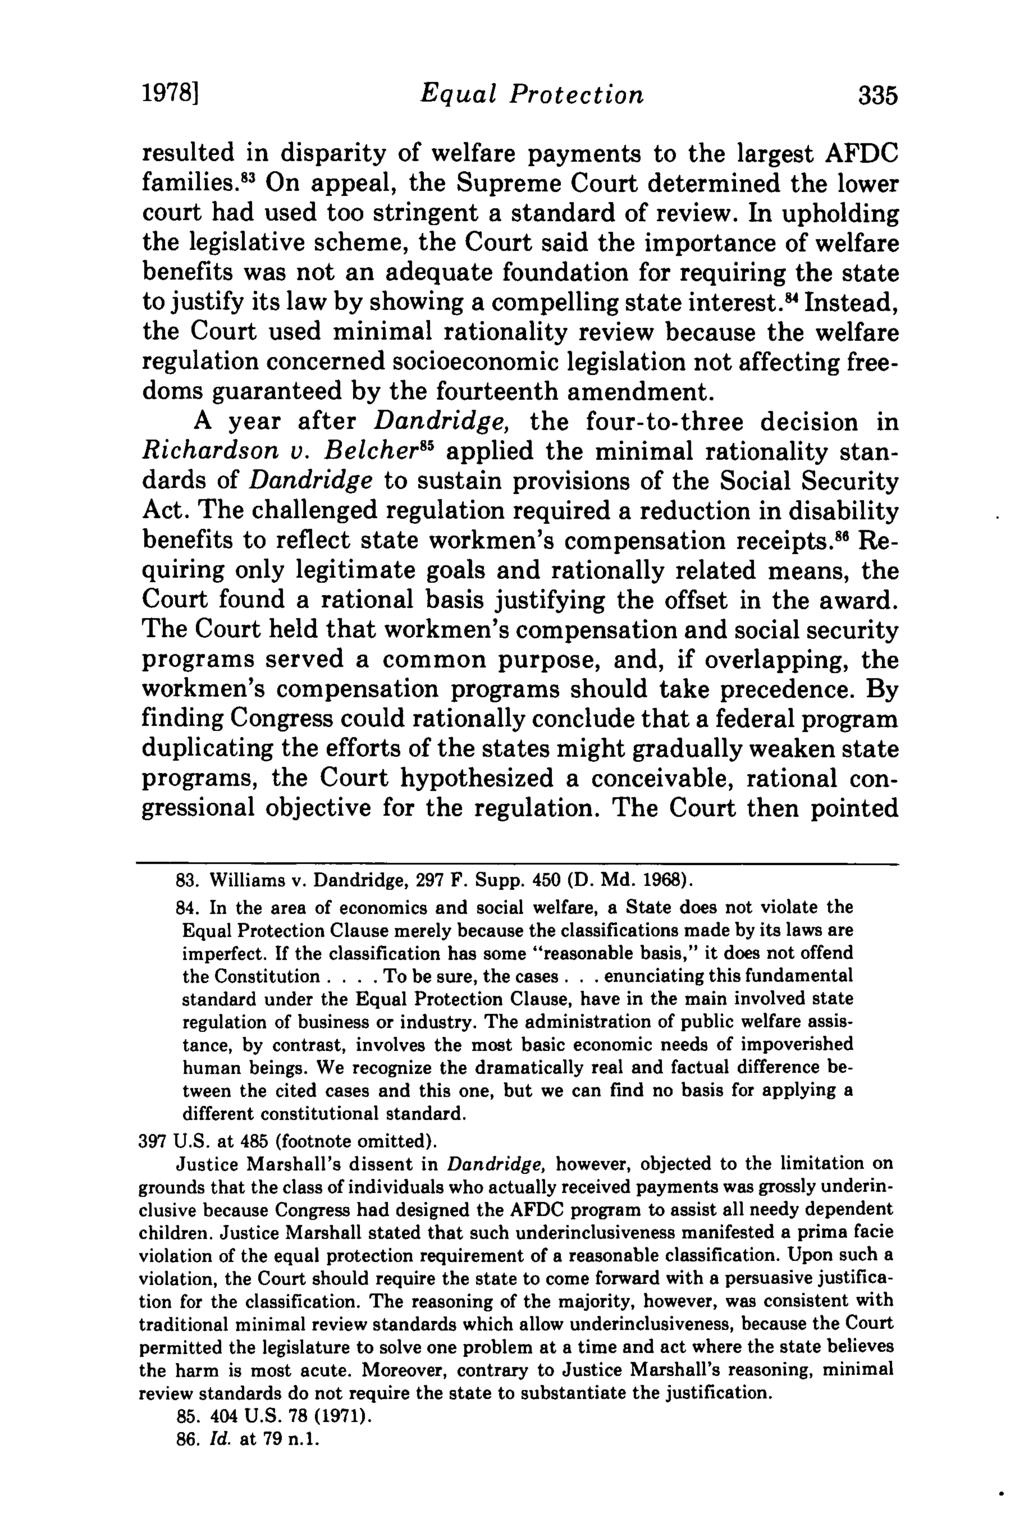 1978] Equal Protection resulted in disparity of welfare payments to the largest AFDC families. 8 3 On appeal, the Supreme Court determined the lower court had used too stringent a standard of review.